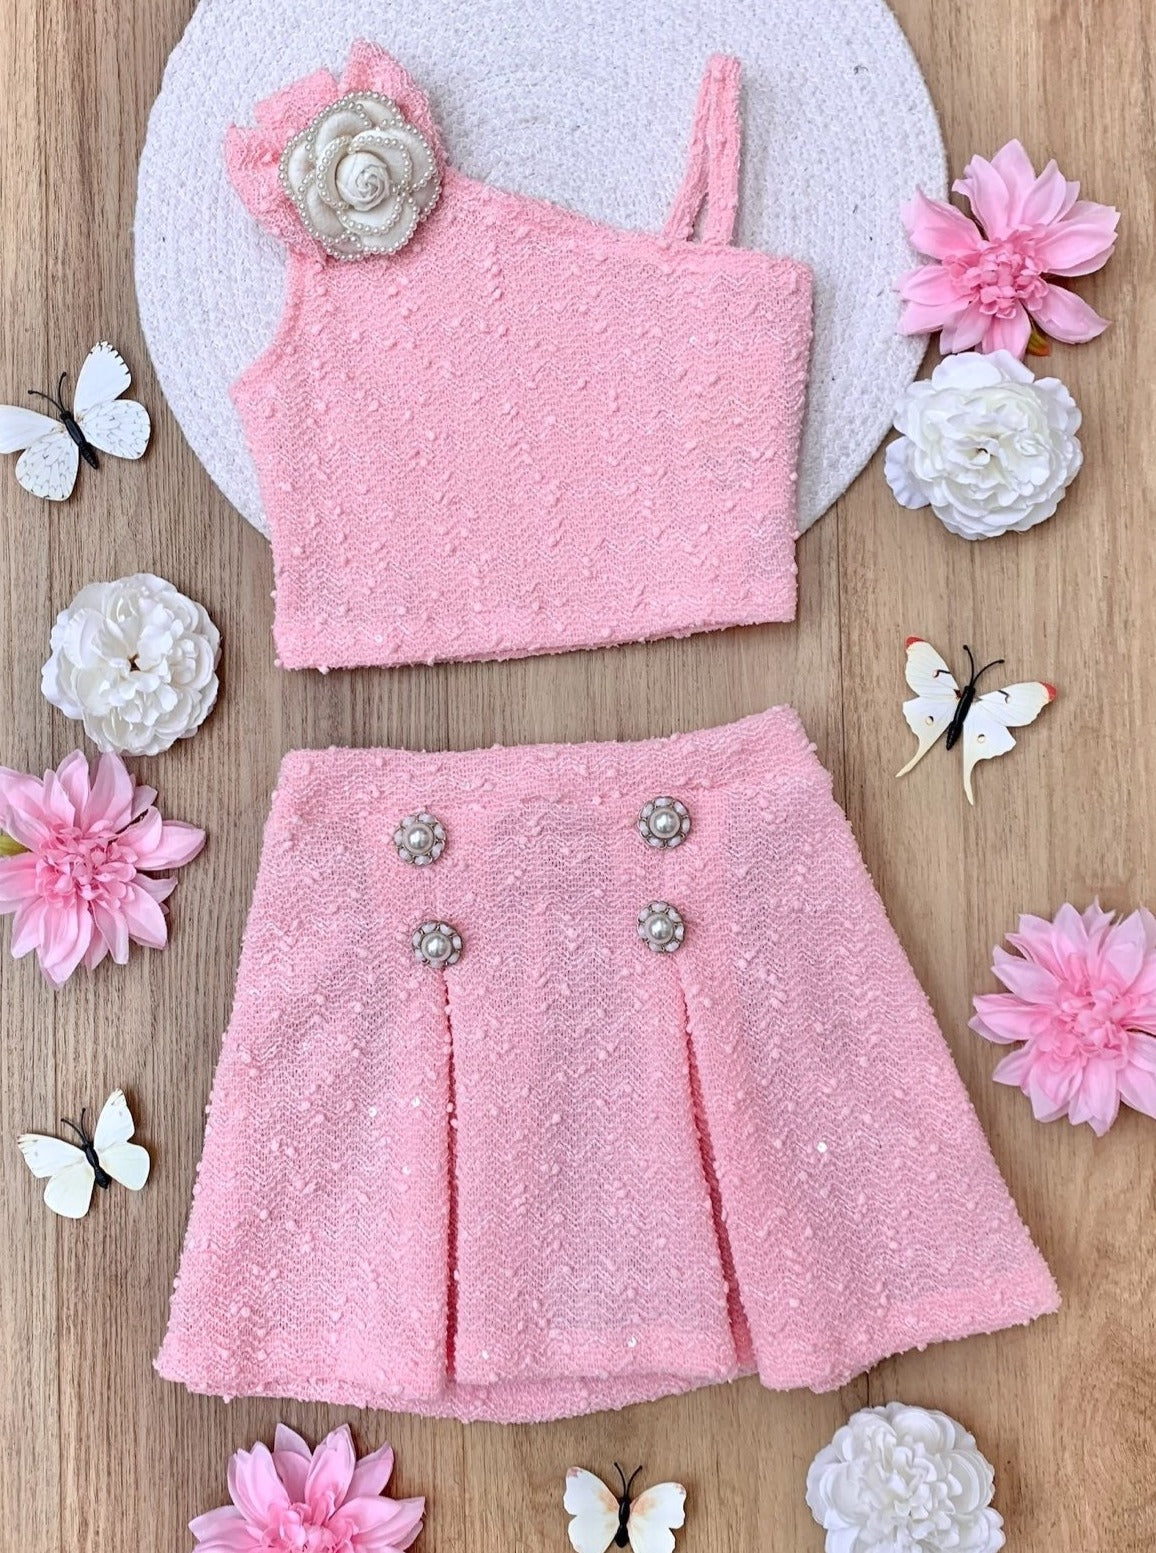 Mia Belle Girls Pink Top and Skirt Set | Girls Spring Sets